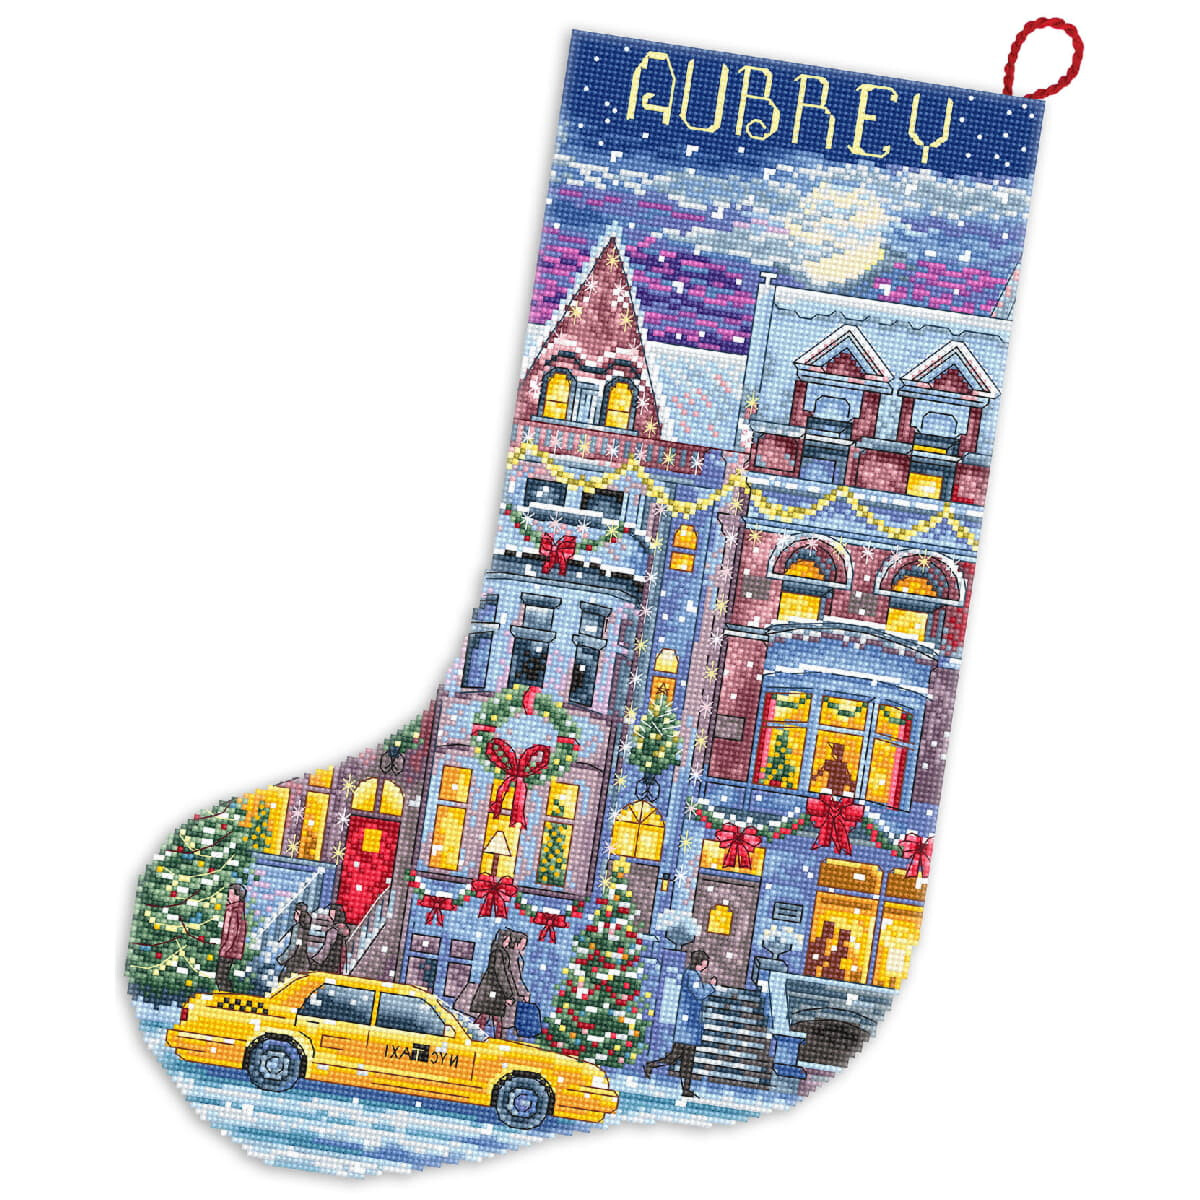 A Christmas stocking with a detailed scene of a snowy...